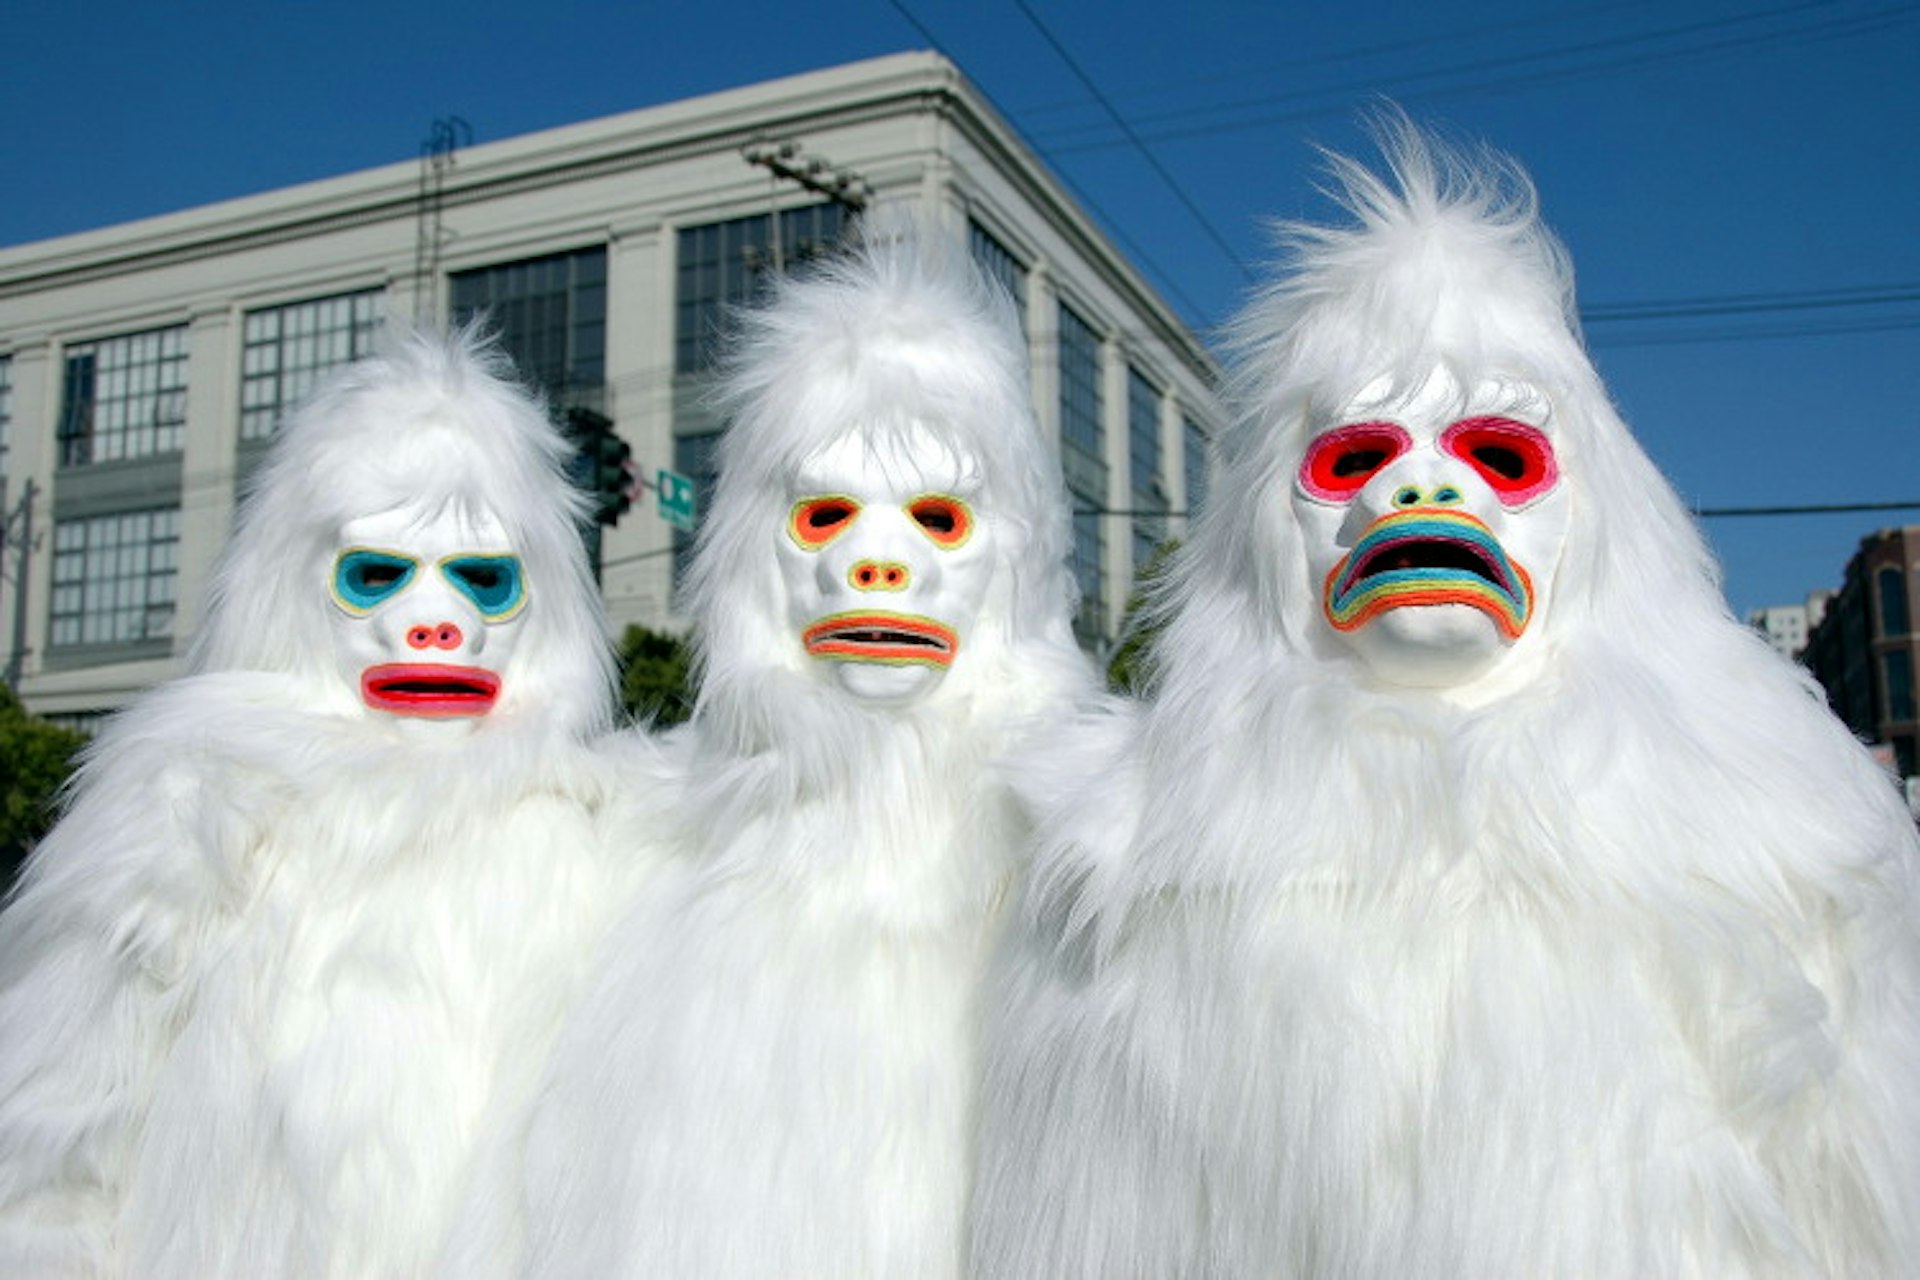 Yeti fans in South Beach, San Francisco. Image by hillary h / CC BY-SA 2.0.